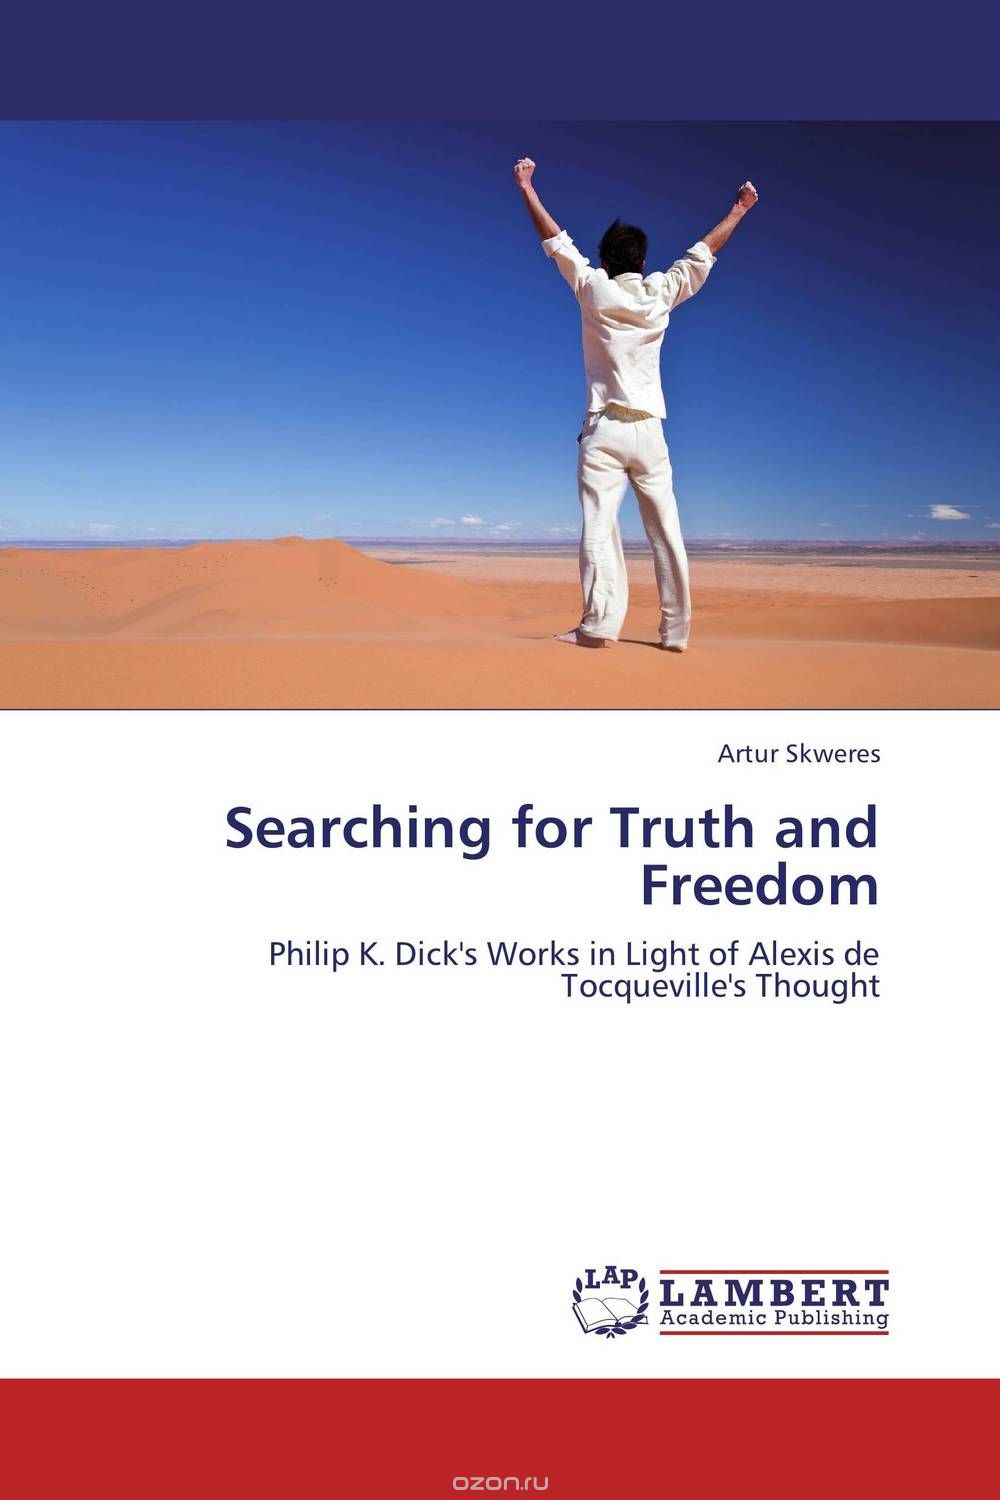 Searching for Truth and Freedom